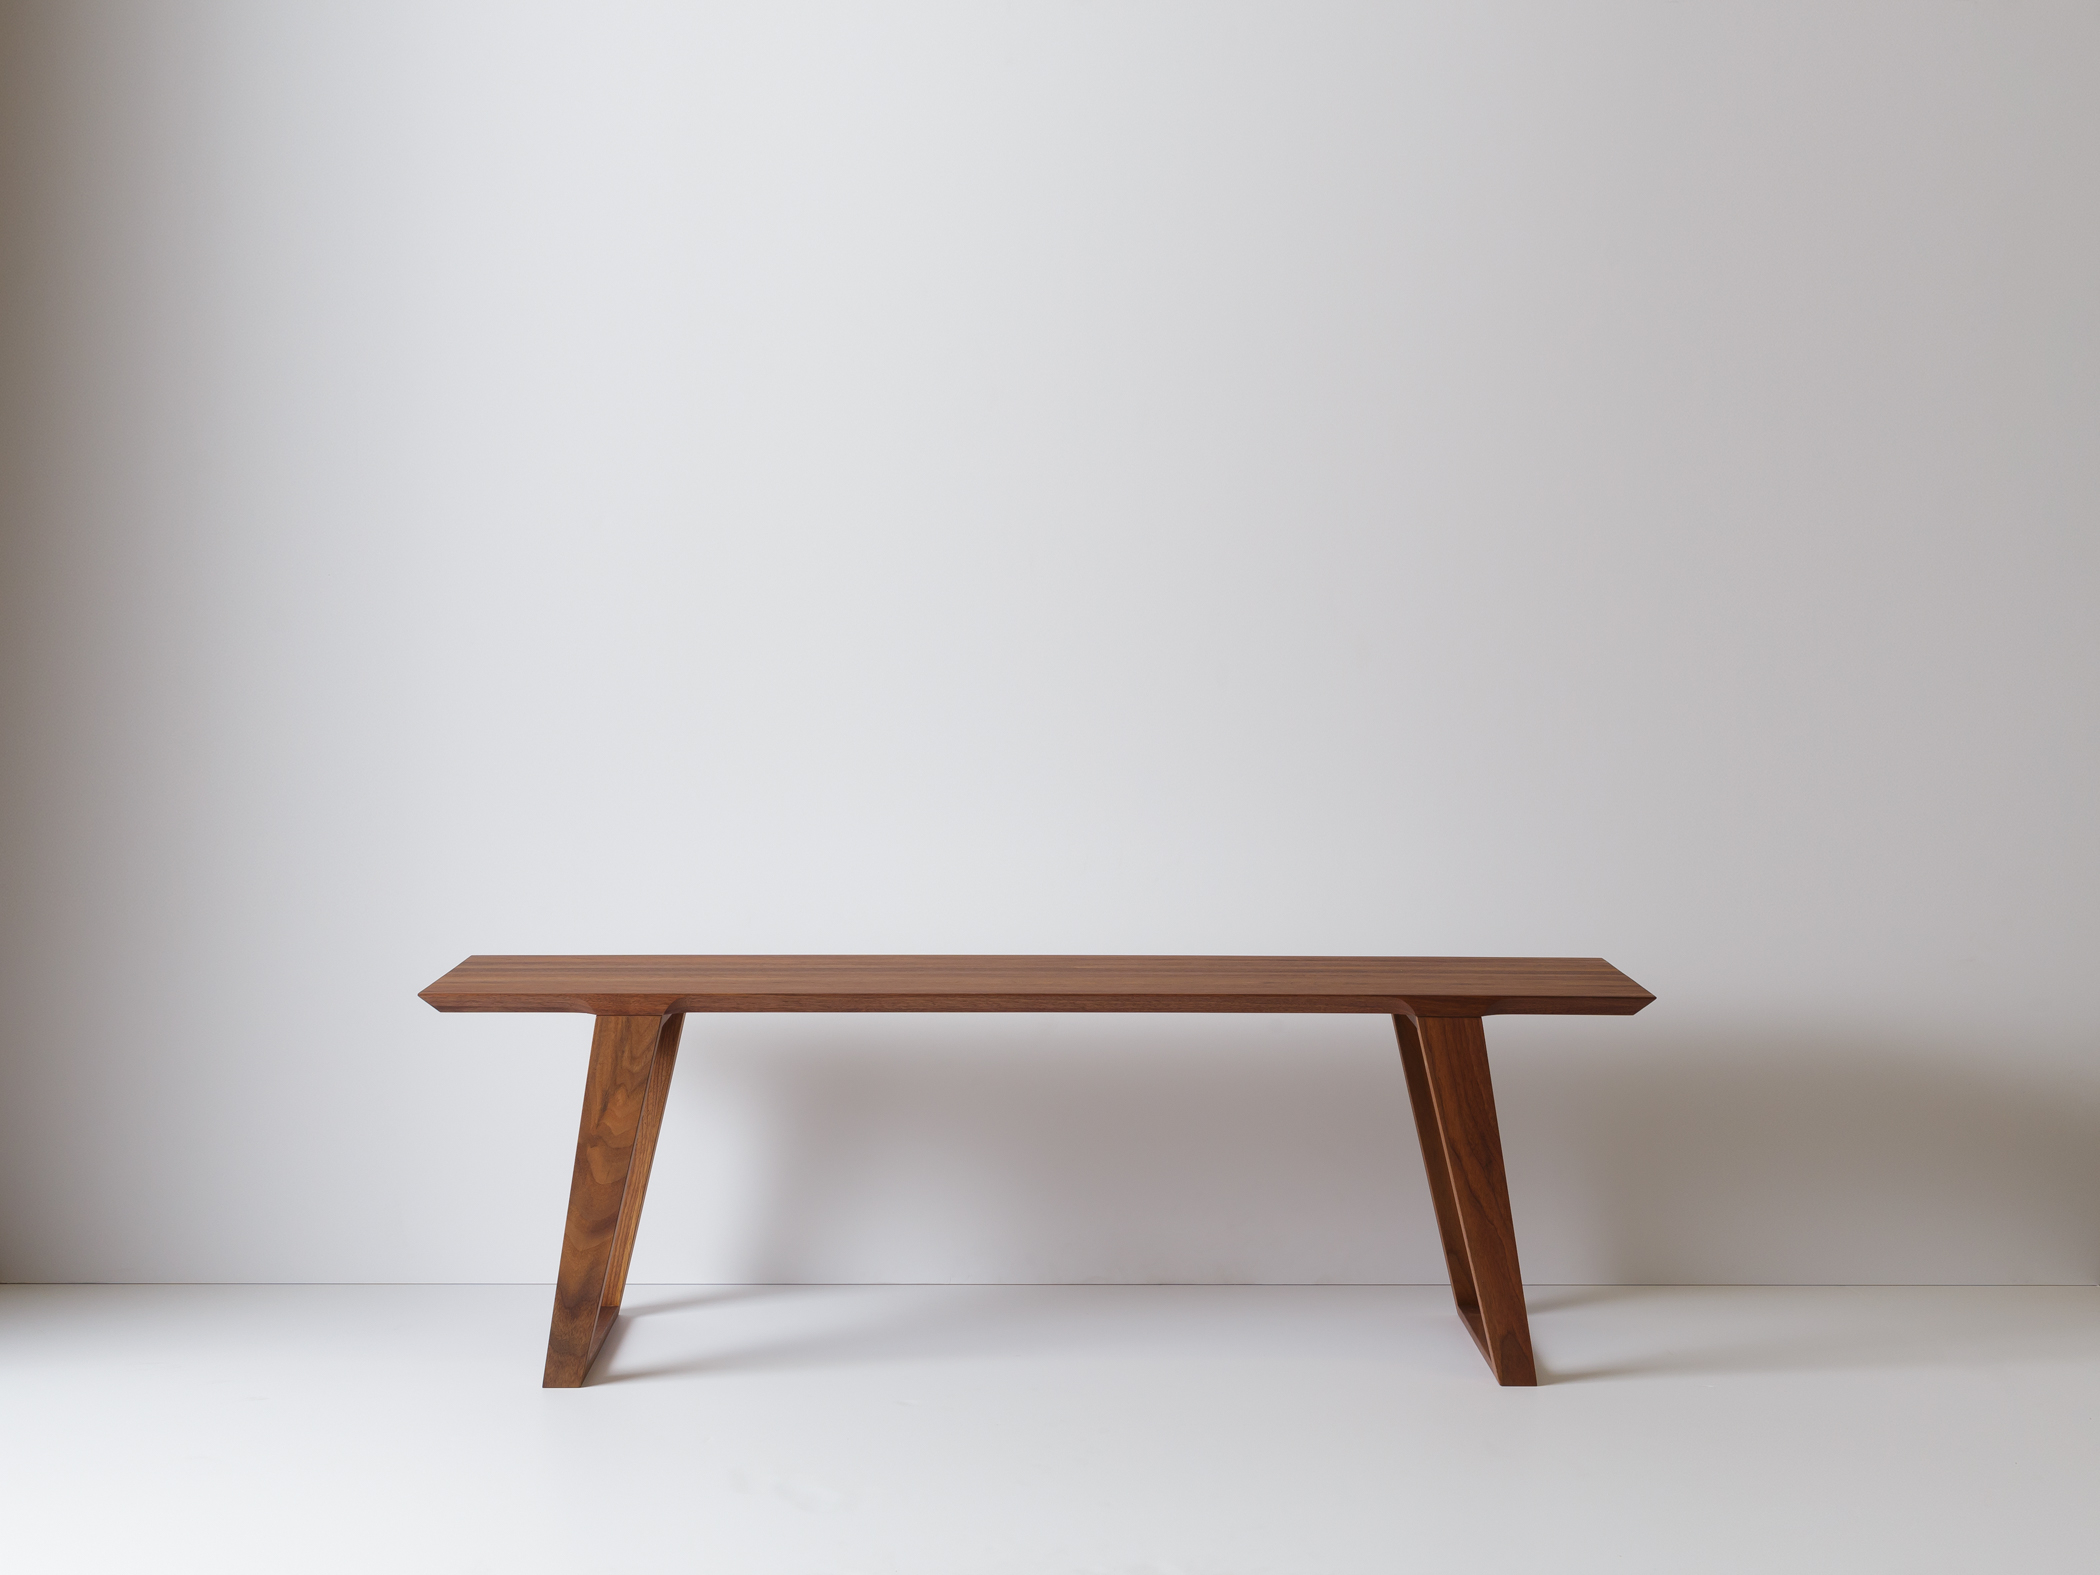 Isometric Bench Modern Coffee Table Or Bench Kalon Studios Us within size 2100 X 1575